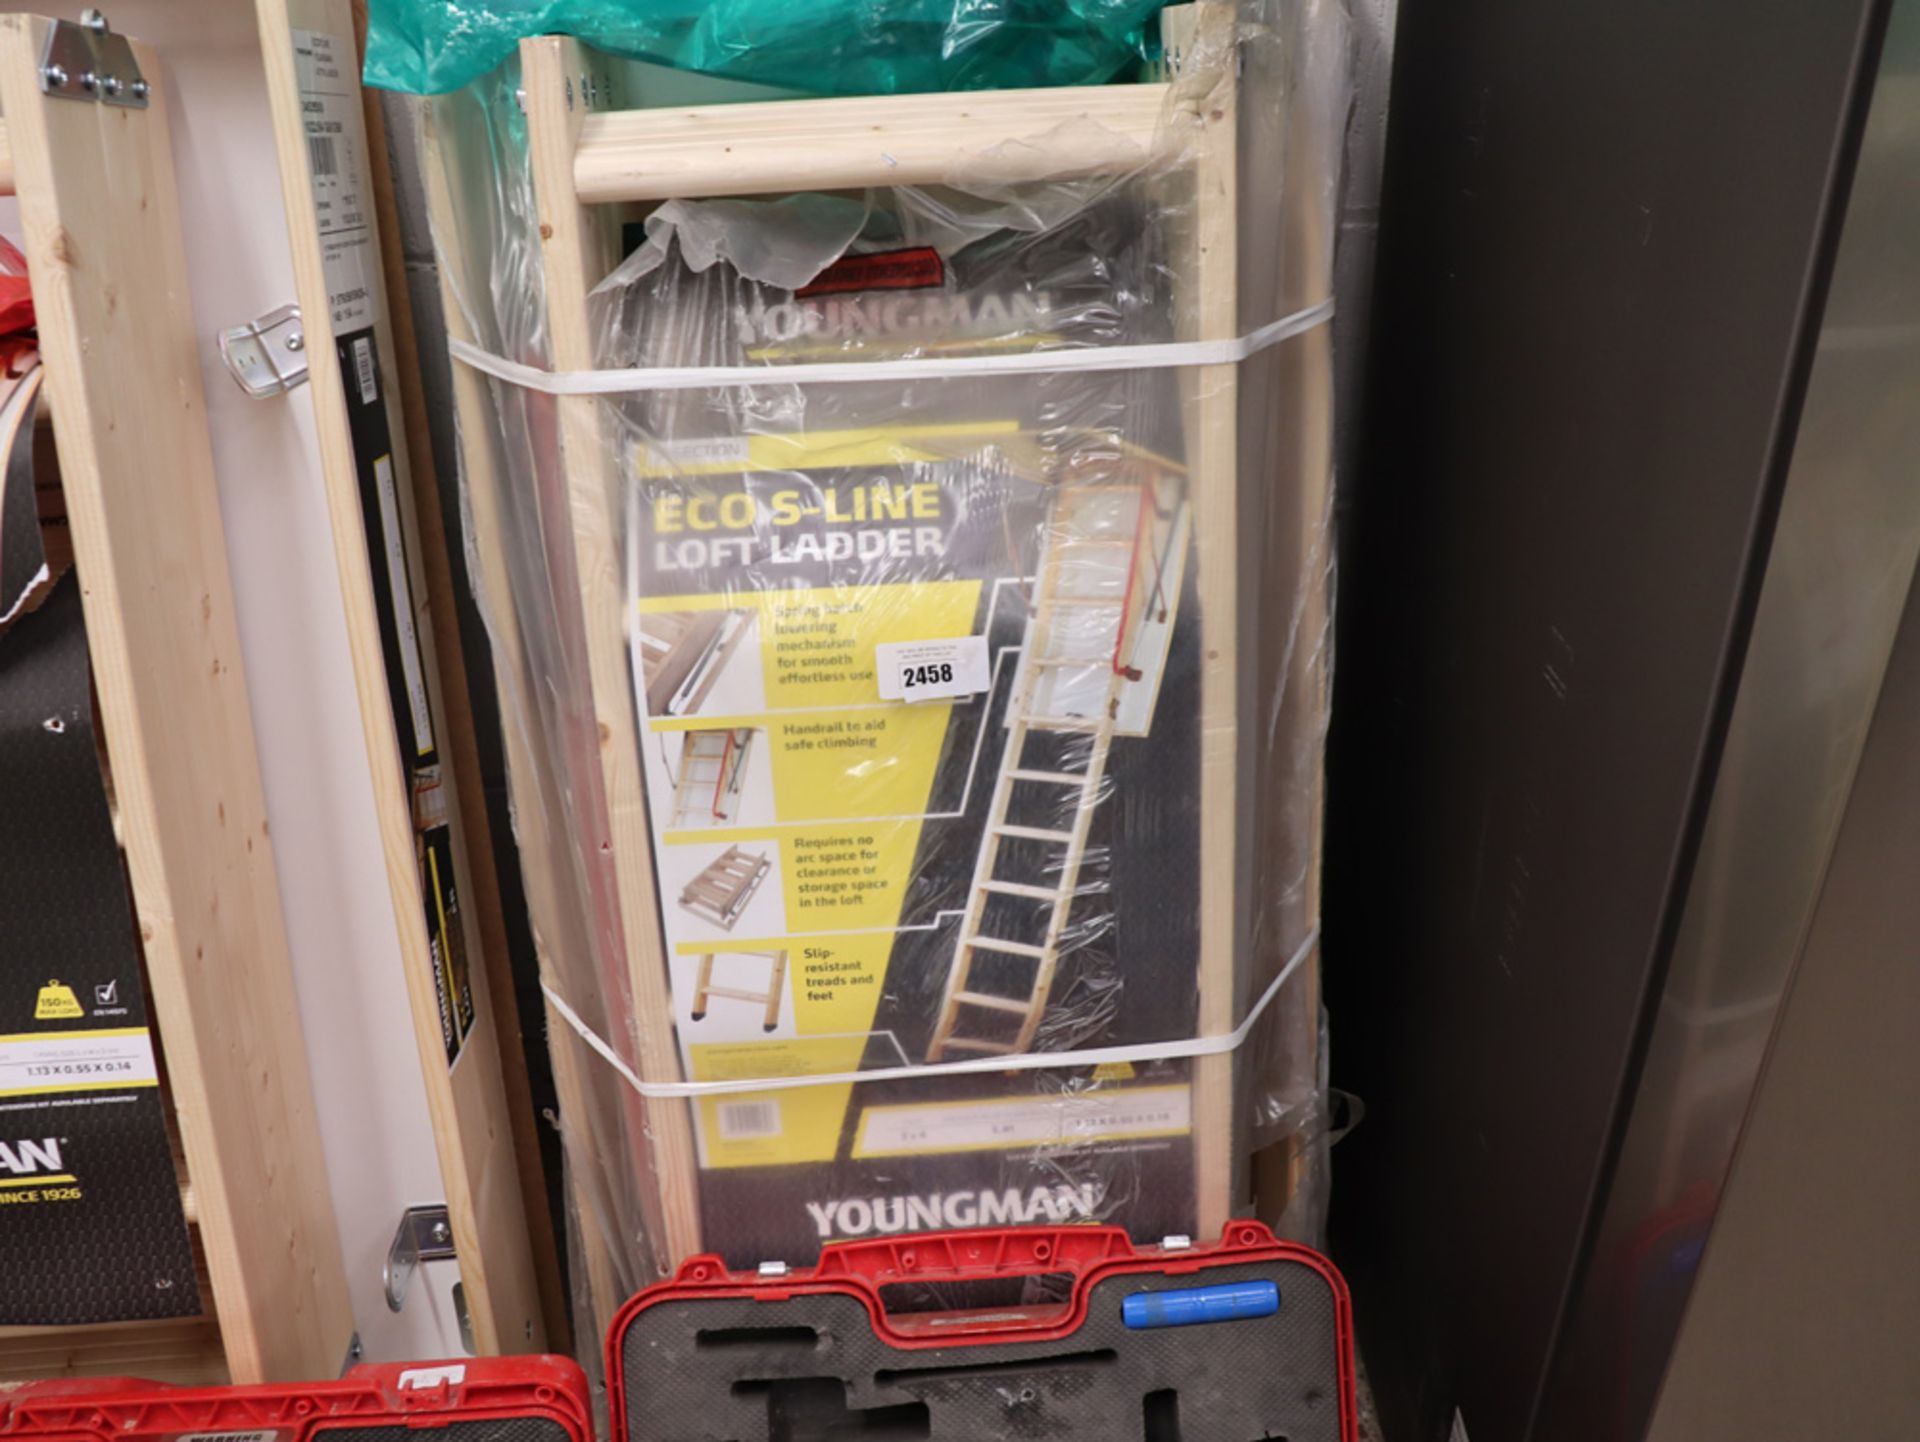 Youngman 3 section Eco S Line loft ladder